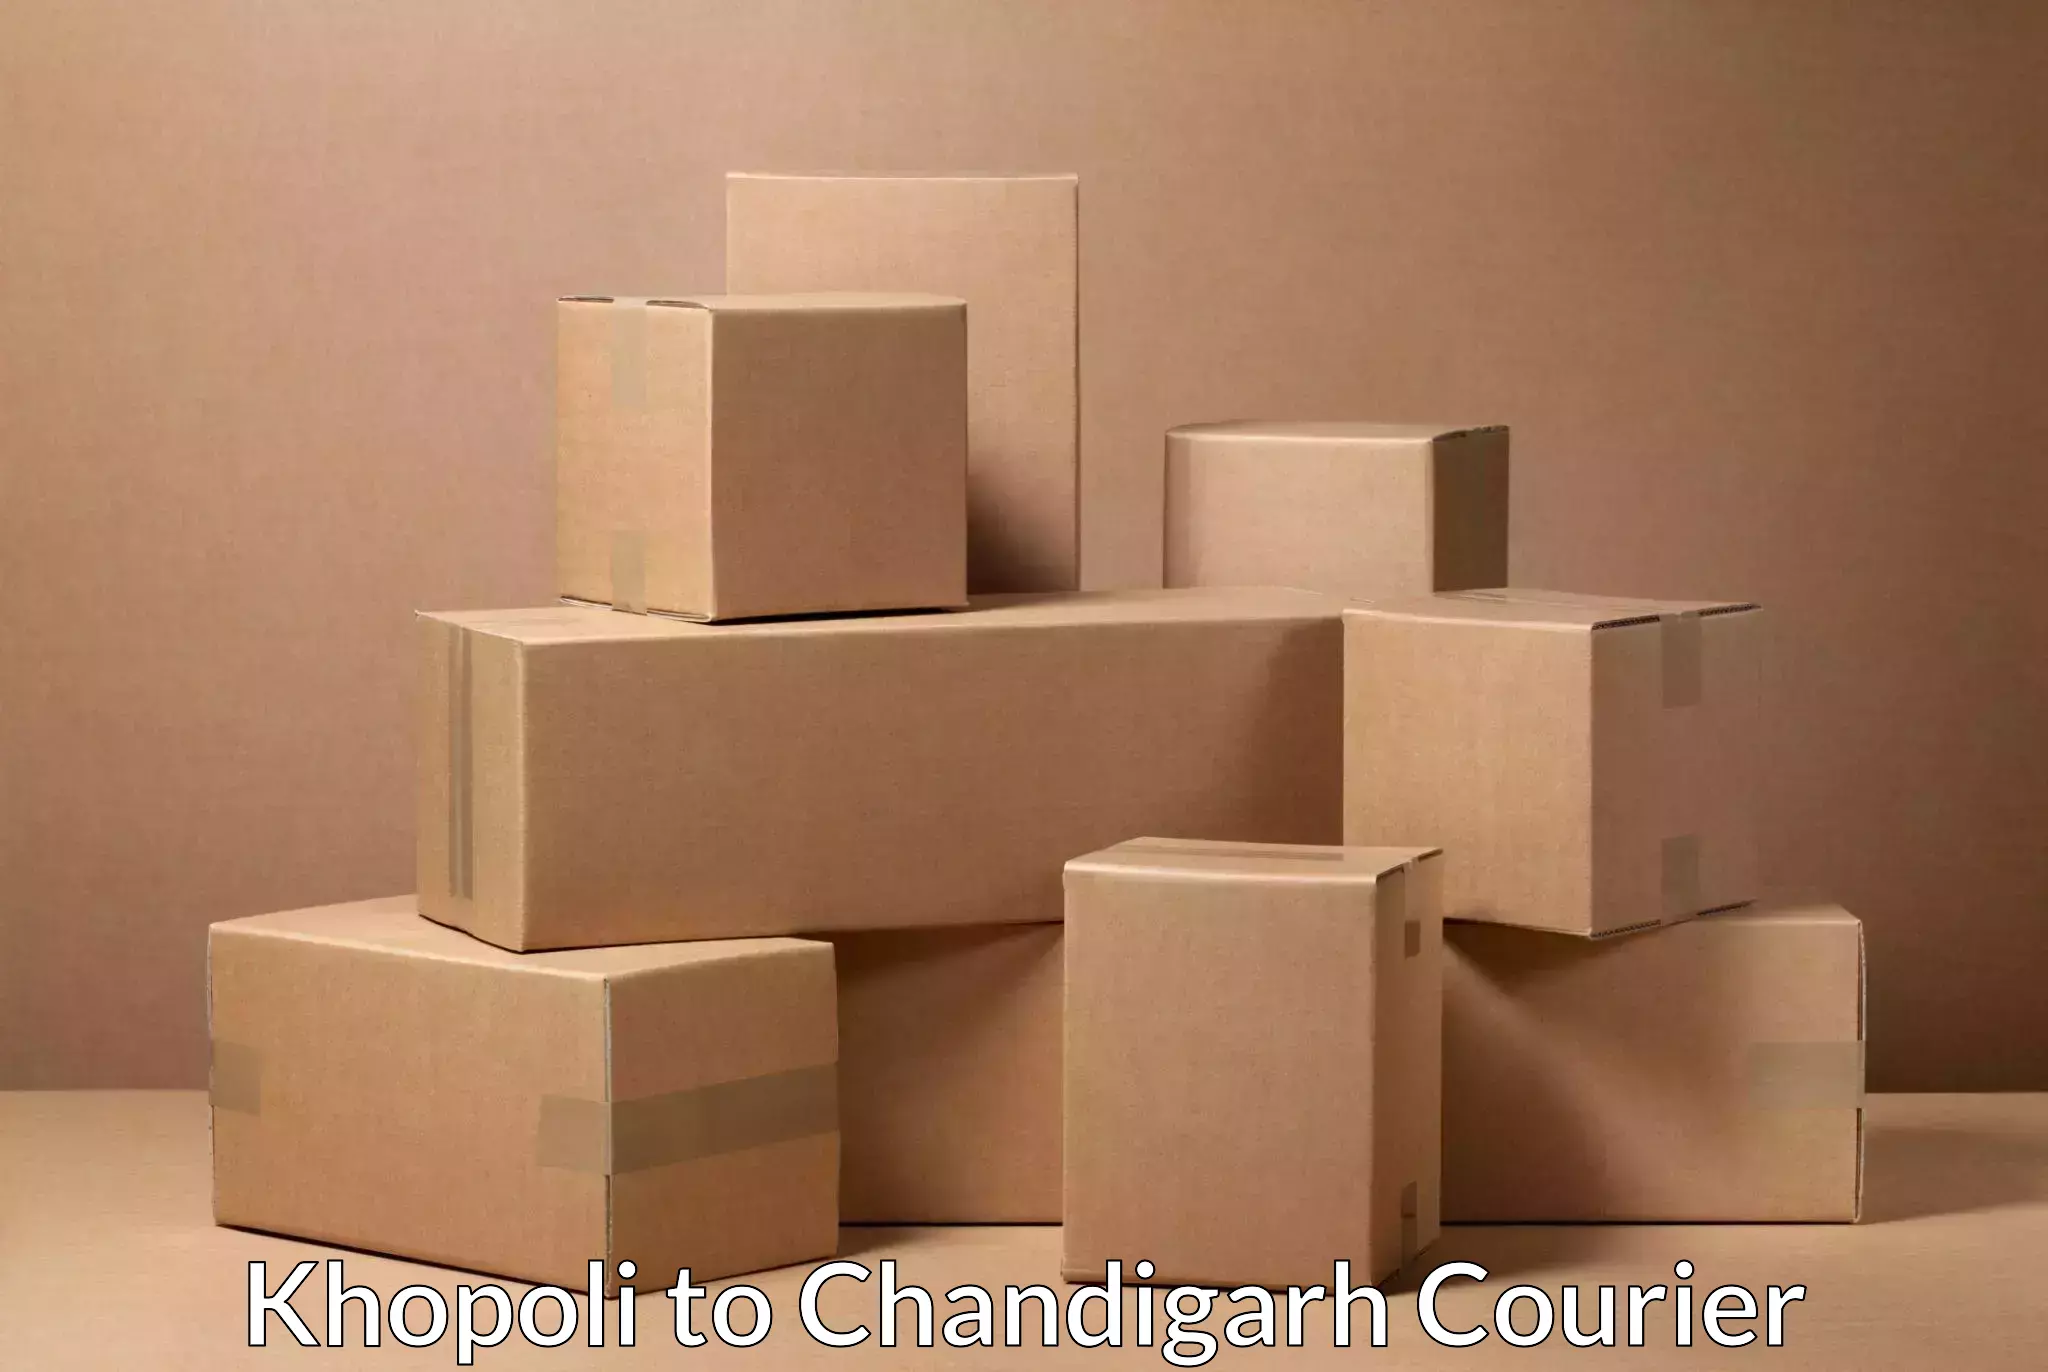 Cash on delivery service Khopoli to Chandigarh